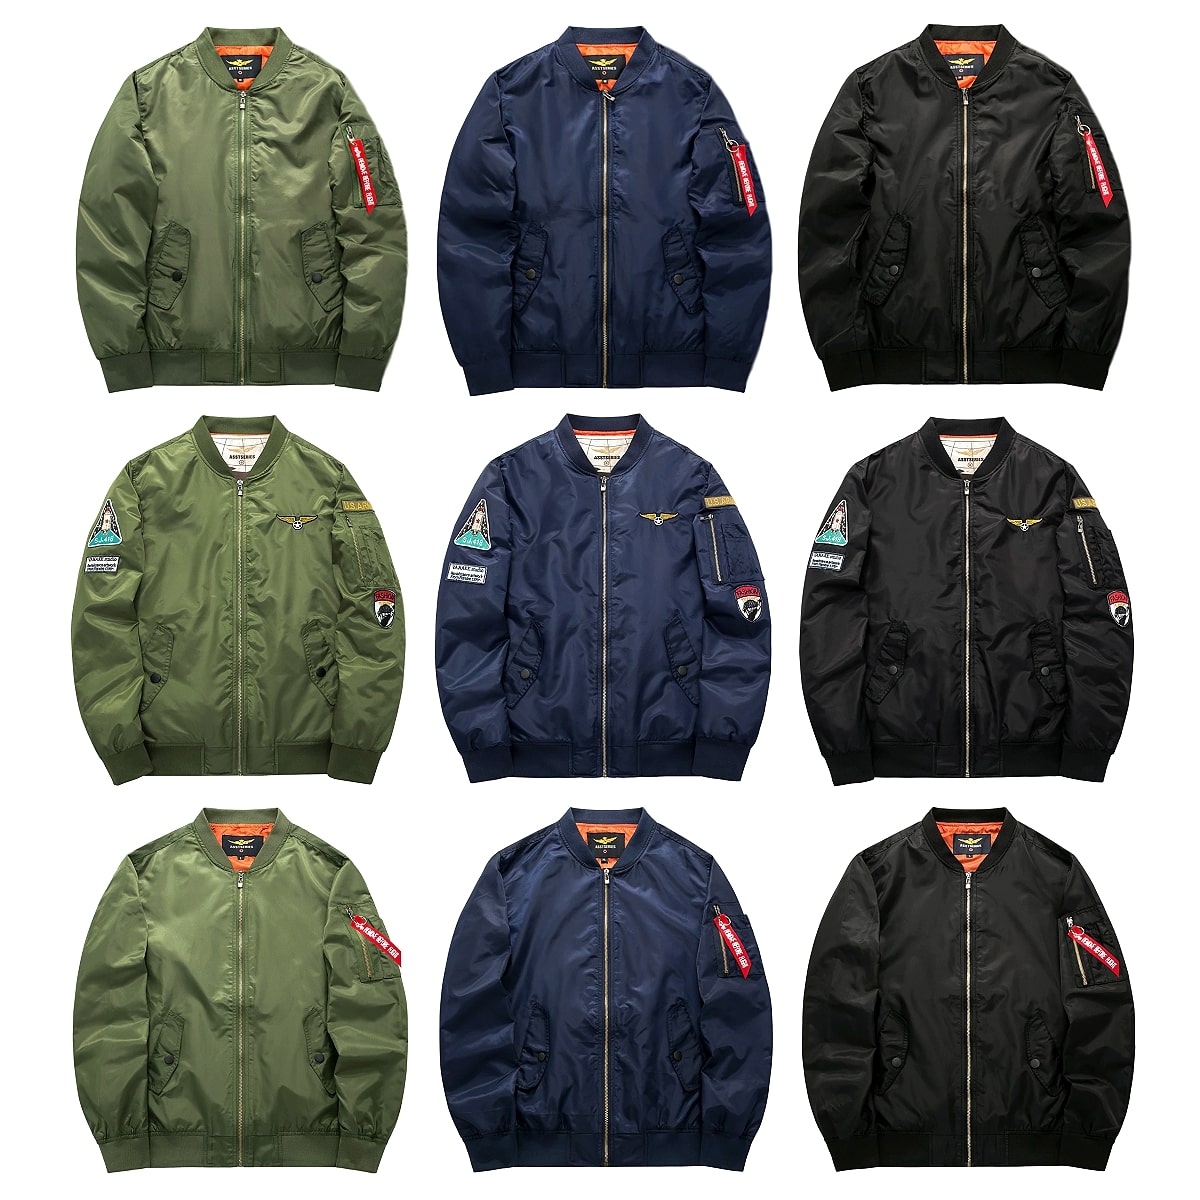 S3^Cv! 9TCY! [Men's Thick and thin Army Bomber Jacket] Y t  H ~ A[~[ {o[WPbg!   by hJ n tCgWPbg EBhu[J[ Wp[ u] AE^[ MA-1 傫TCY oCN!